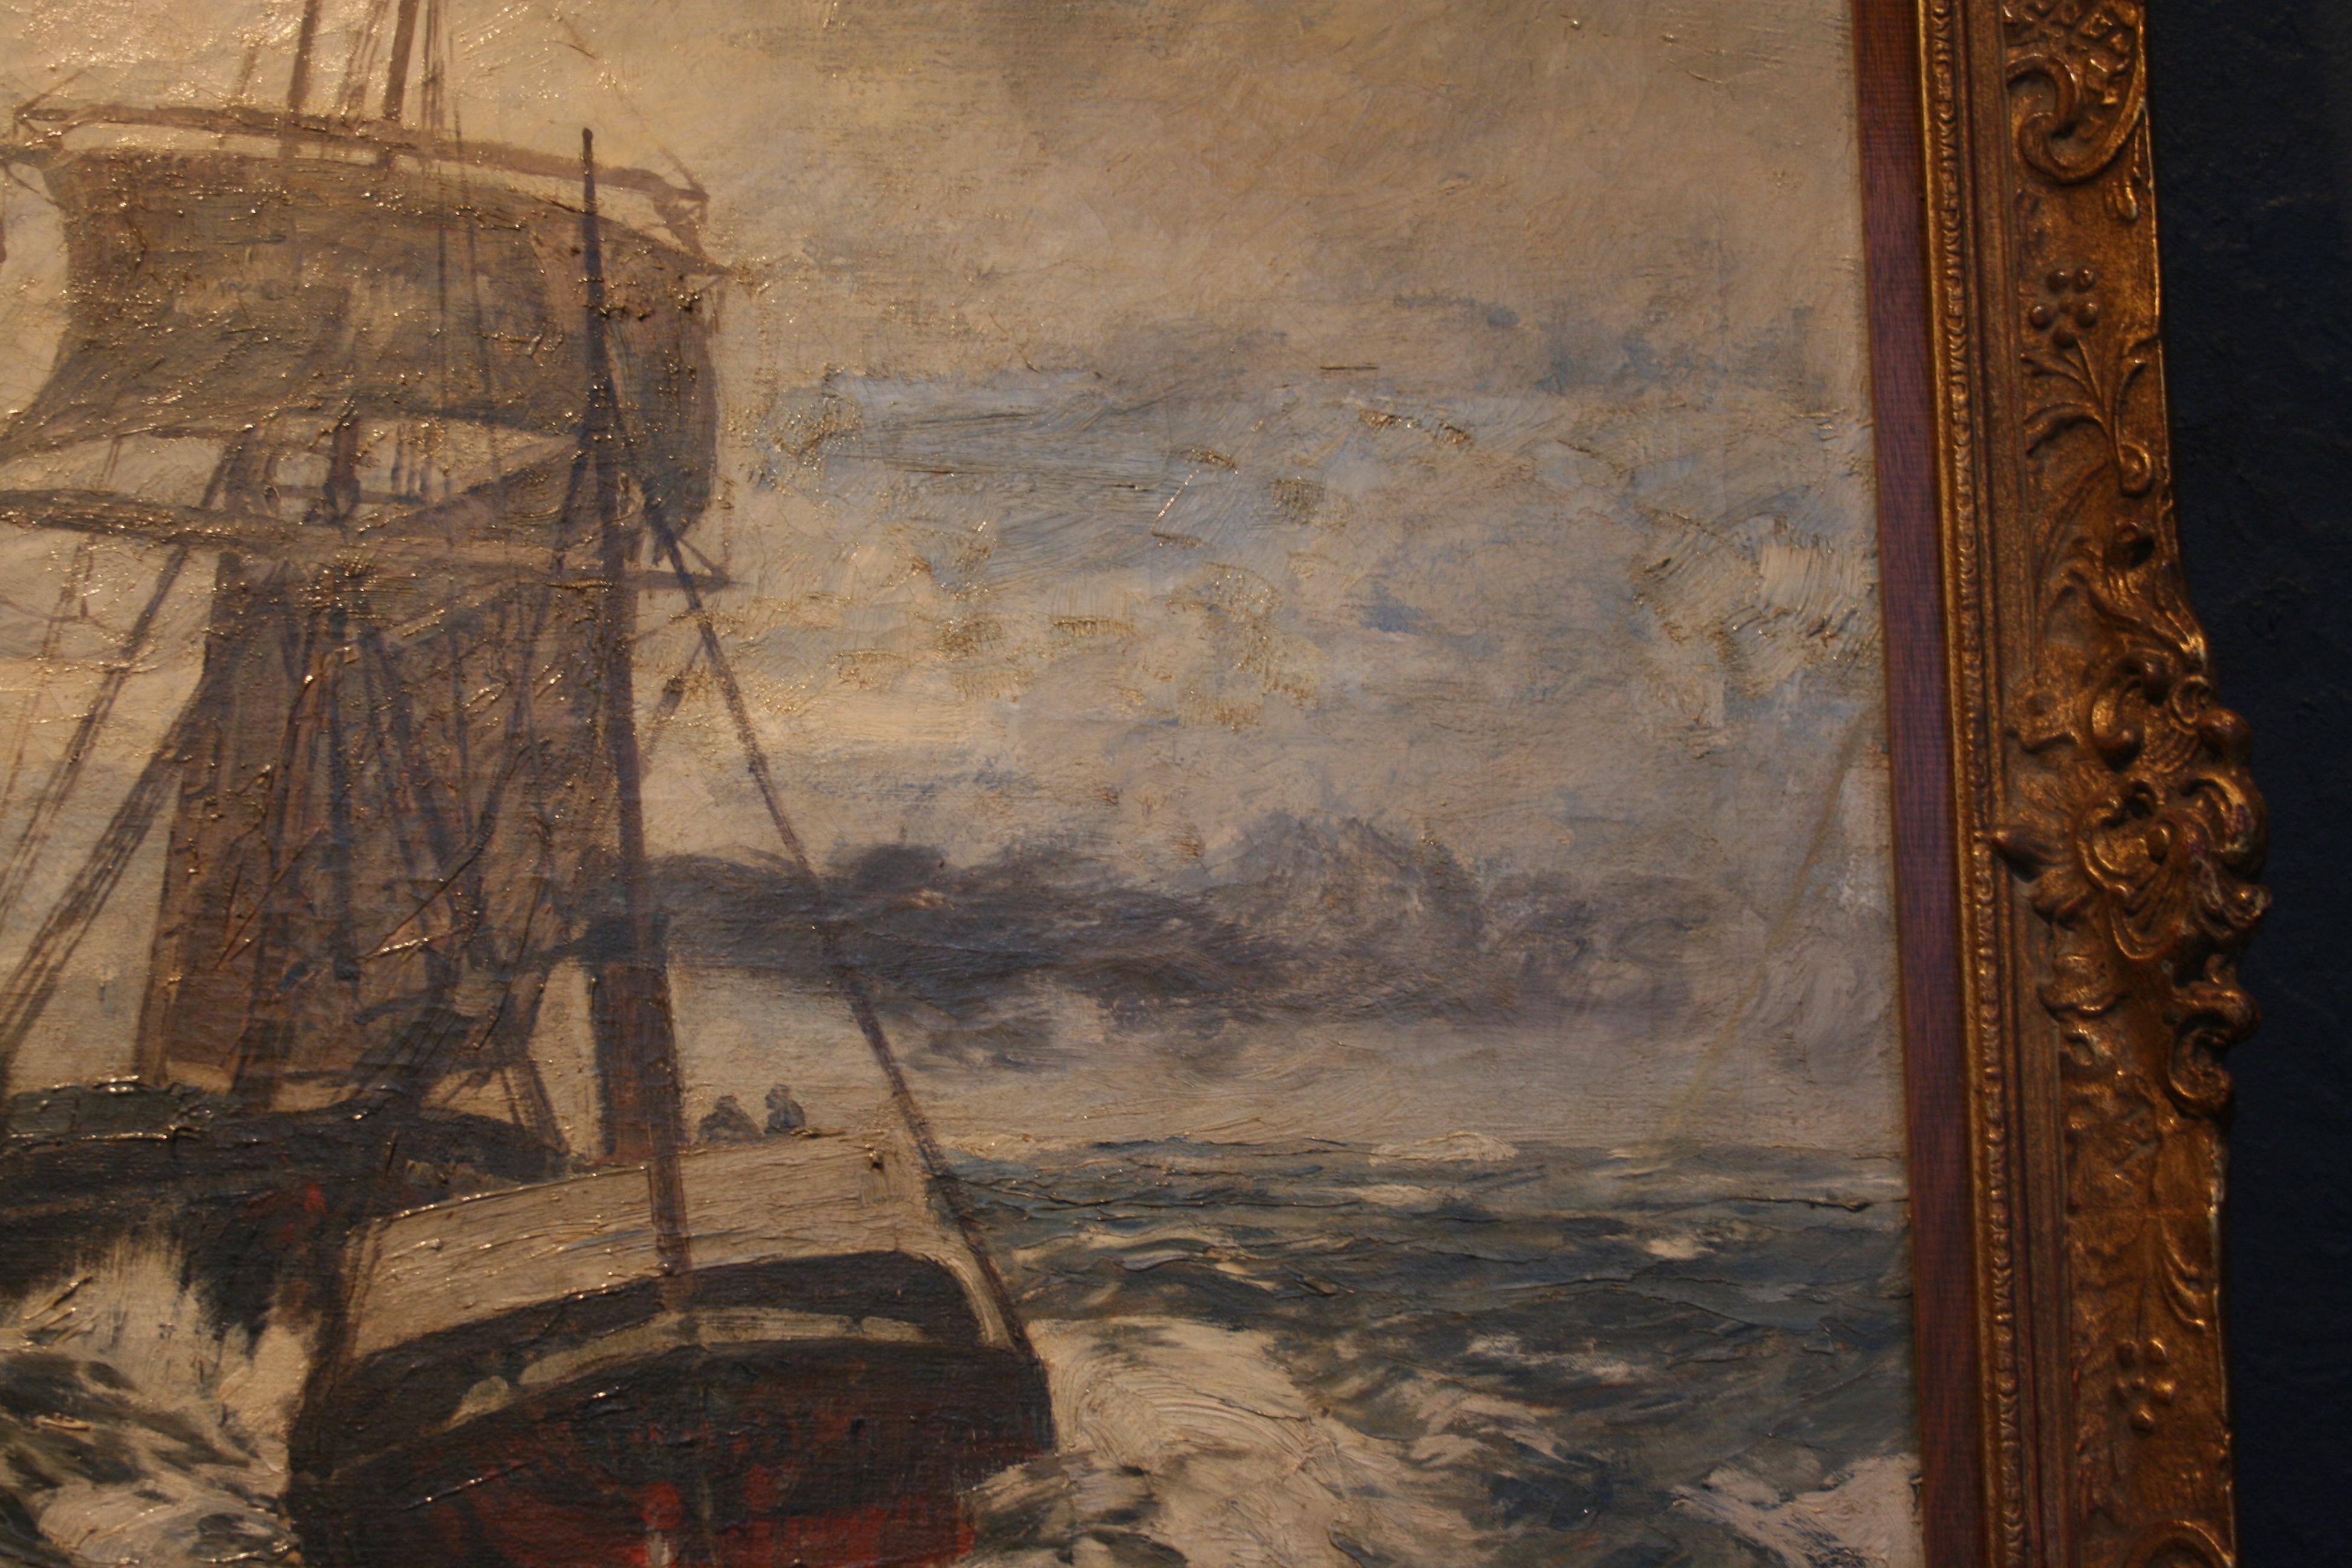 Painting Oil on Canvas, Fishing Boats On The High Seas, by Andreas Dirks 4